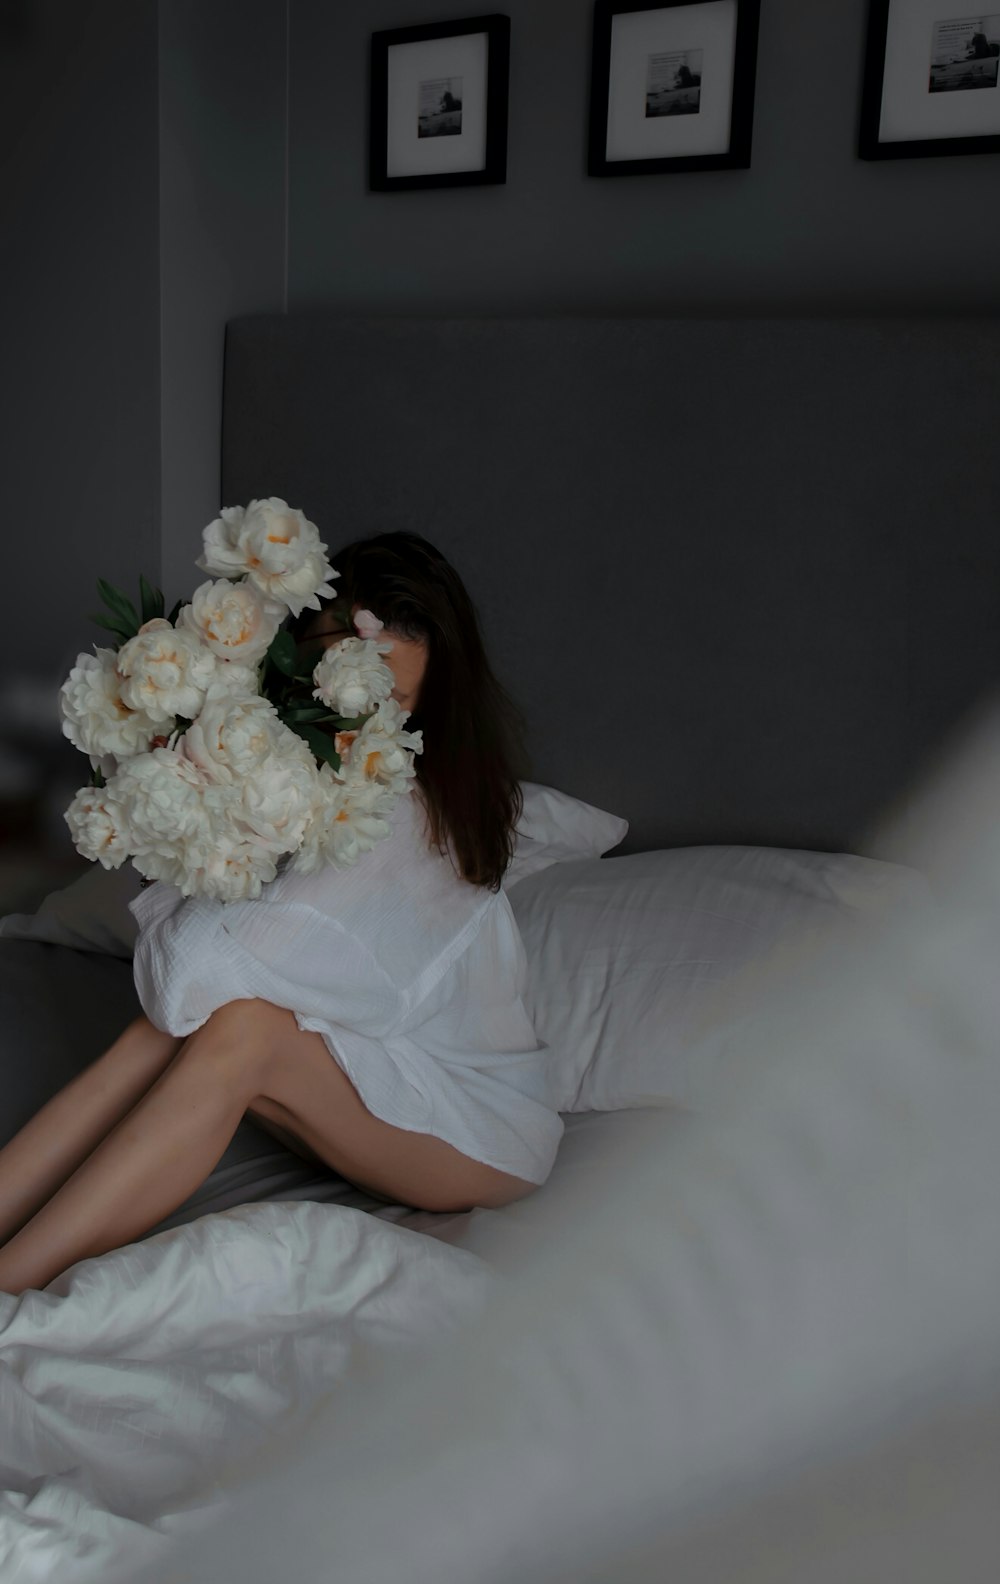 a woman sitting on a bed holding a bouquet of flowers